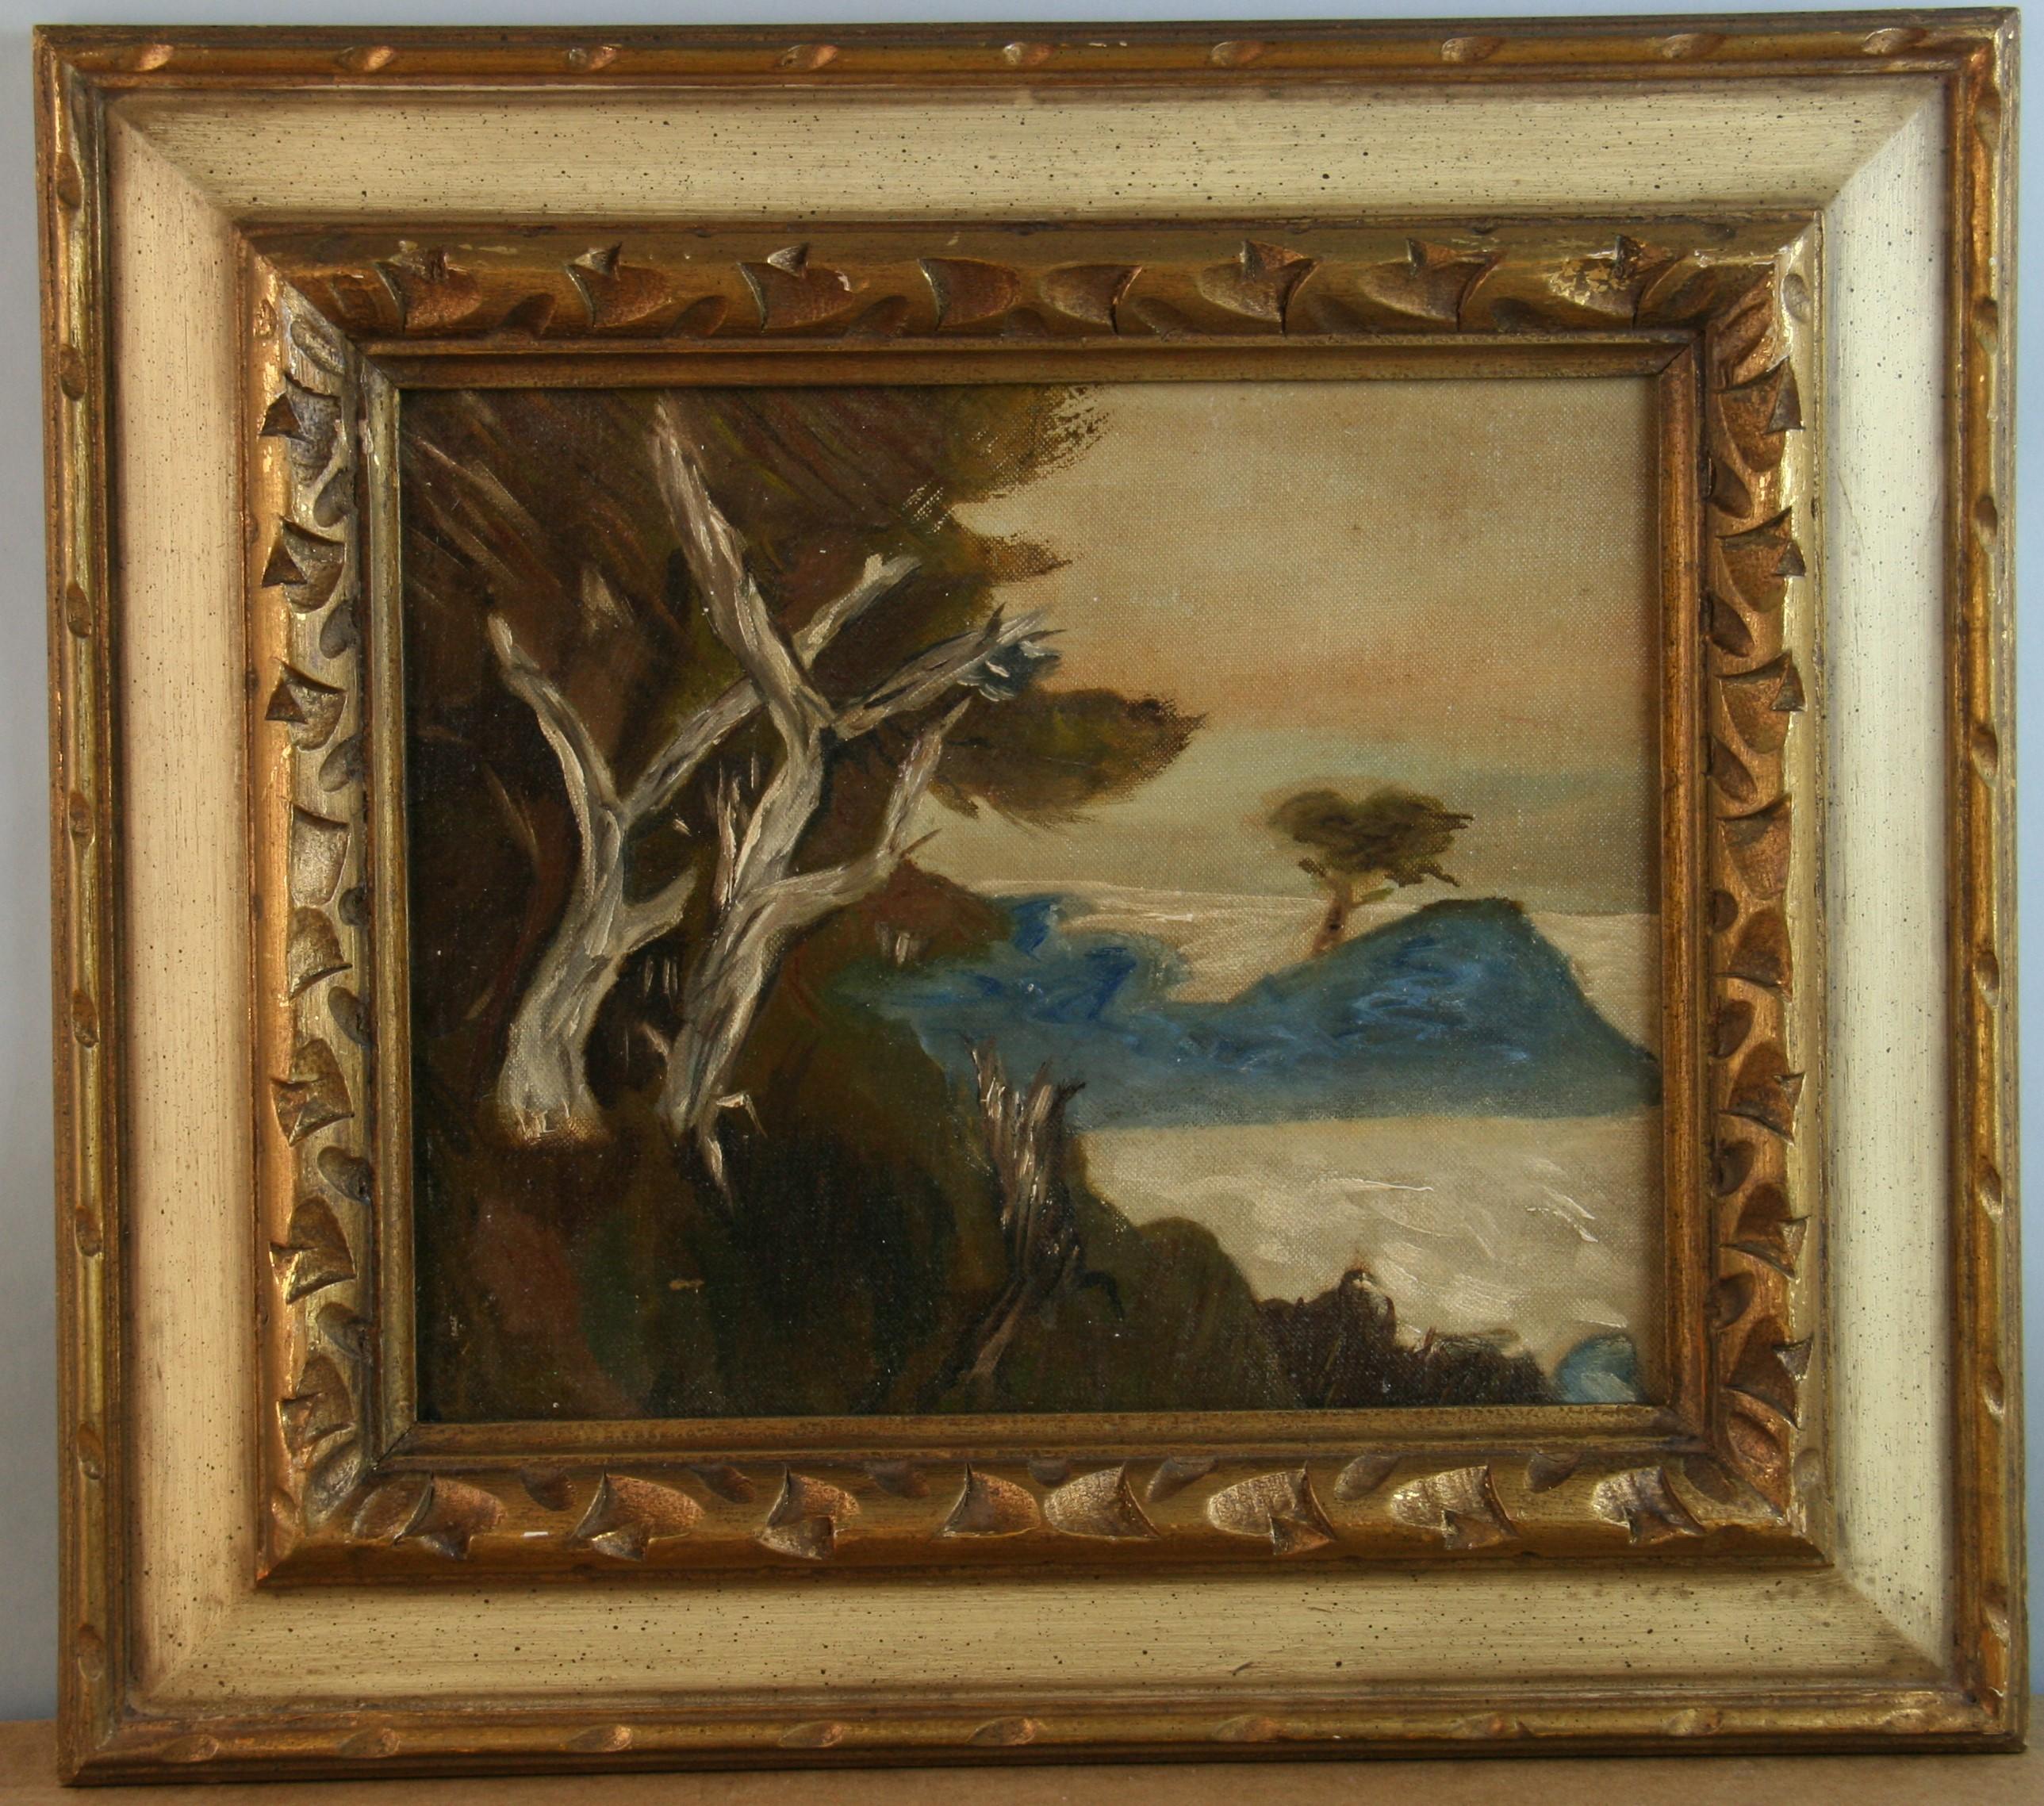 Antique American Impressionist Beach Scene Scene Original Framed Oil Painting - Brown Landscape Painting by Unknown